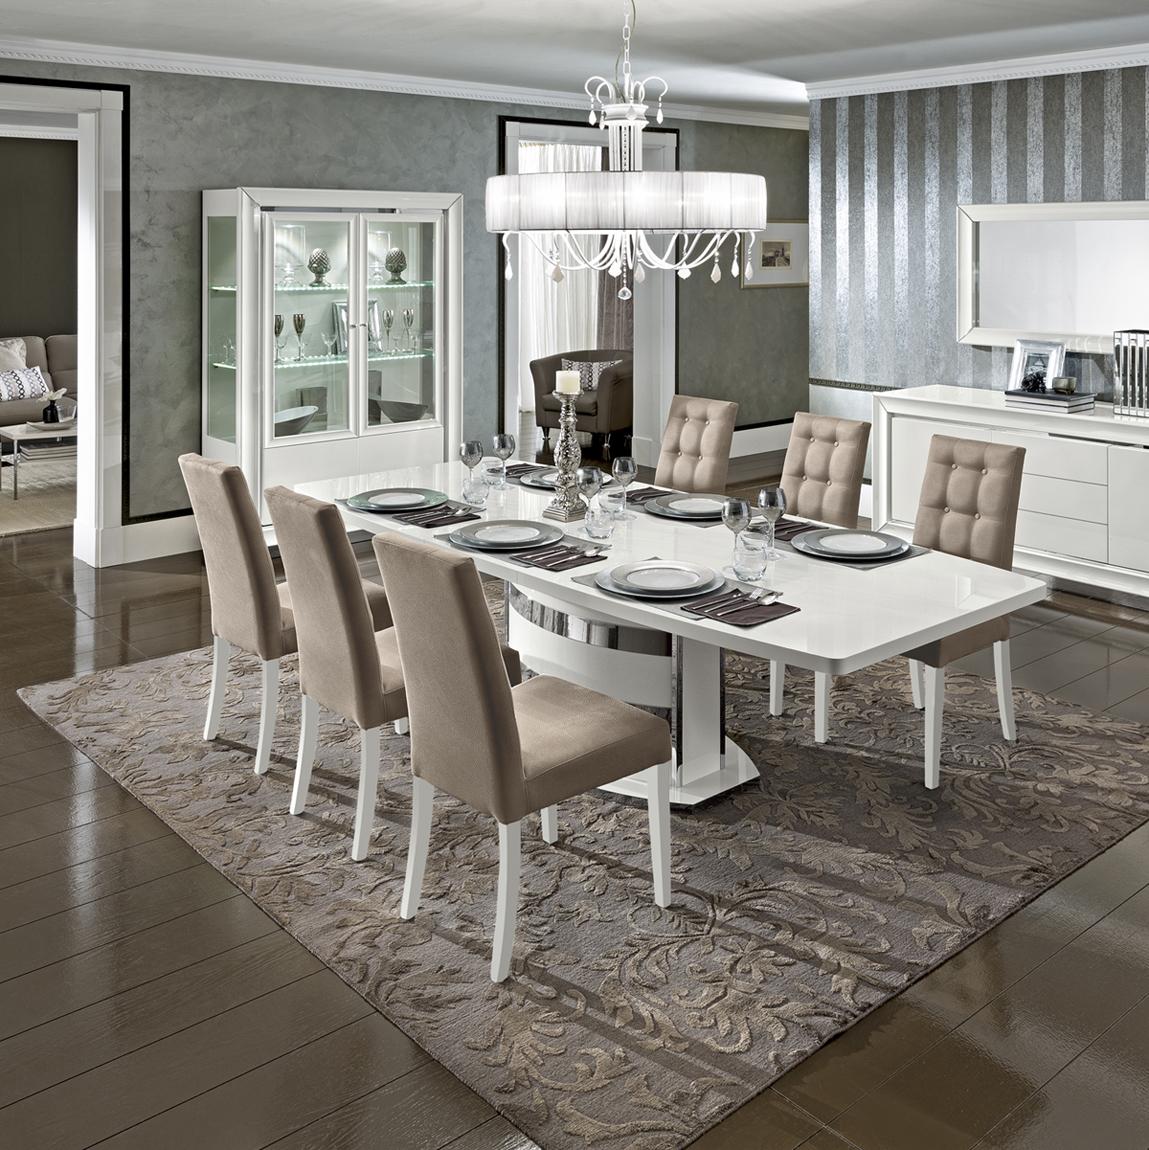 Contemporary, Modern Dining Table Set Dama Bianca Dama Bianca-Dining-9PC in White, Beige Fabric